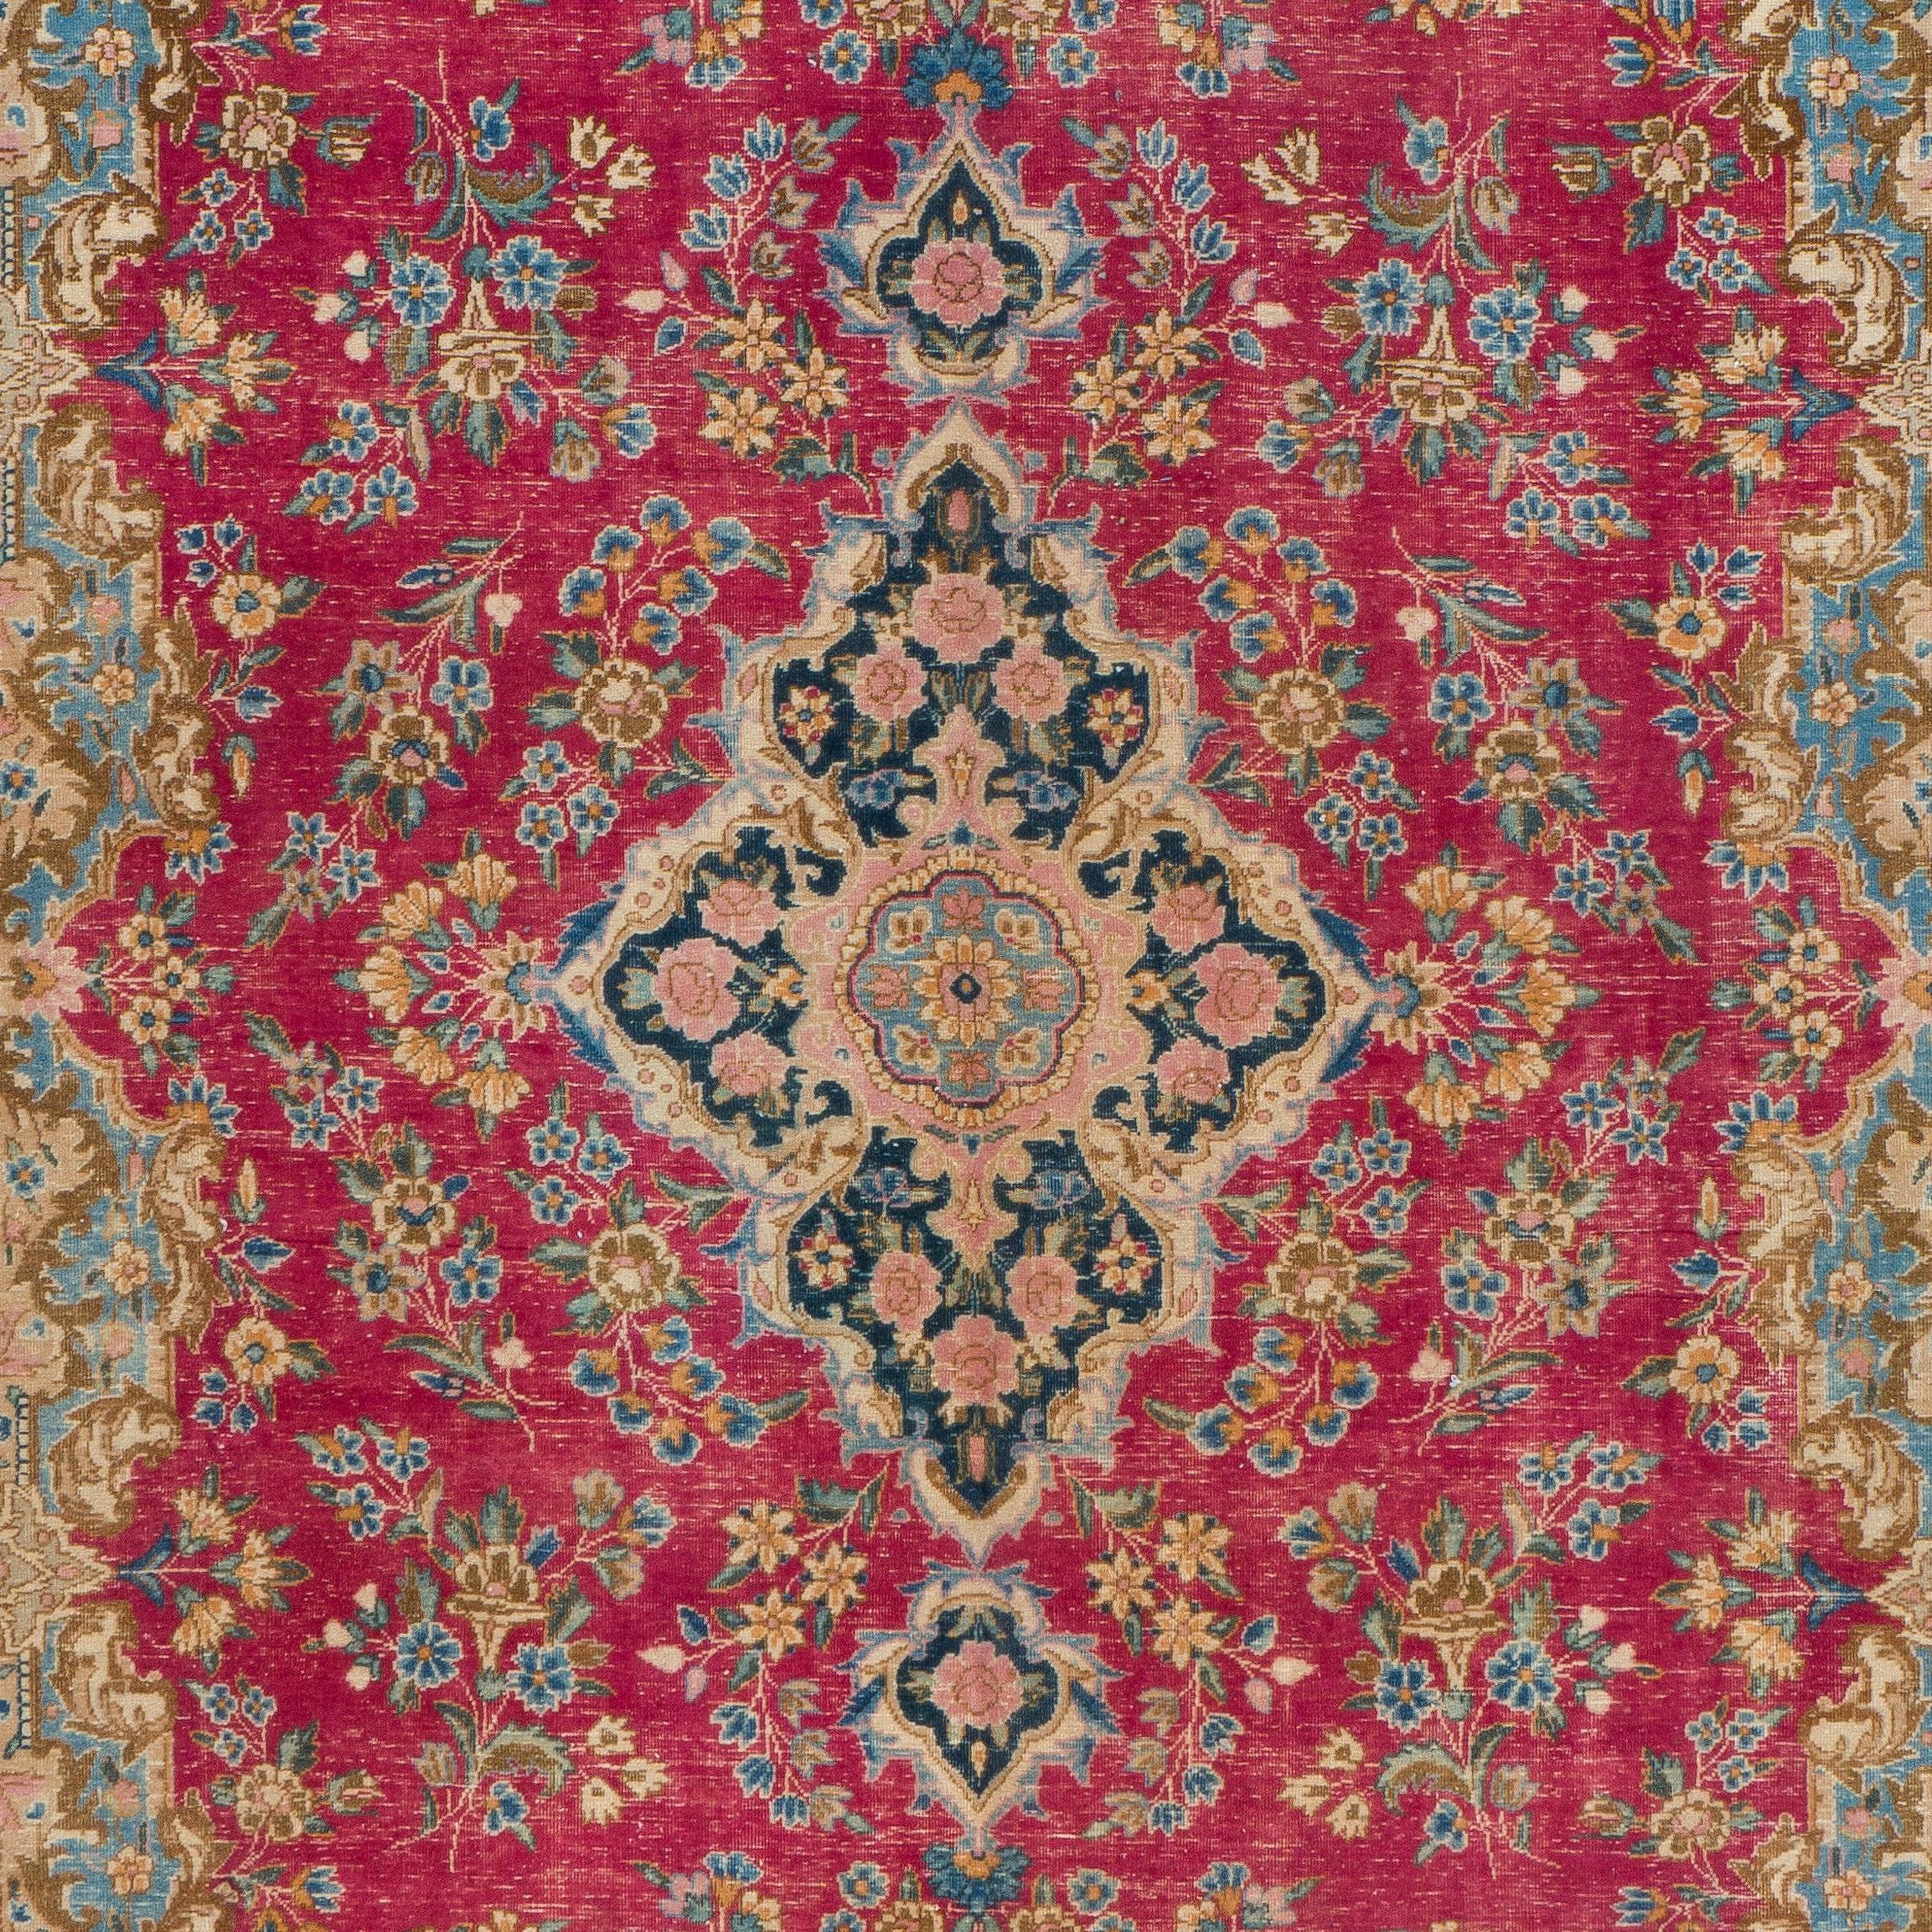 A semi antique Persian Kerman rug with a fantastic design and rich saturated plant dyed colors. Finely hand knotted, good condition, sturdy and as clean as a brand new rug (deep washed professionally).
Size: 9.5 x 13.4 ft.